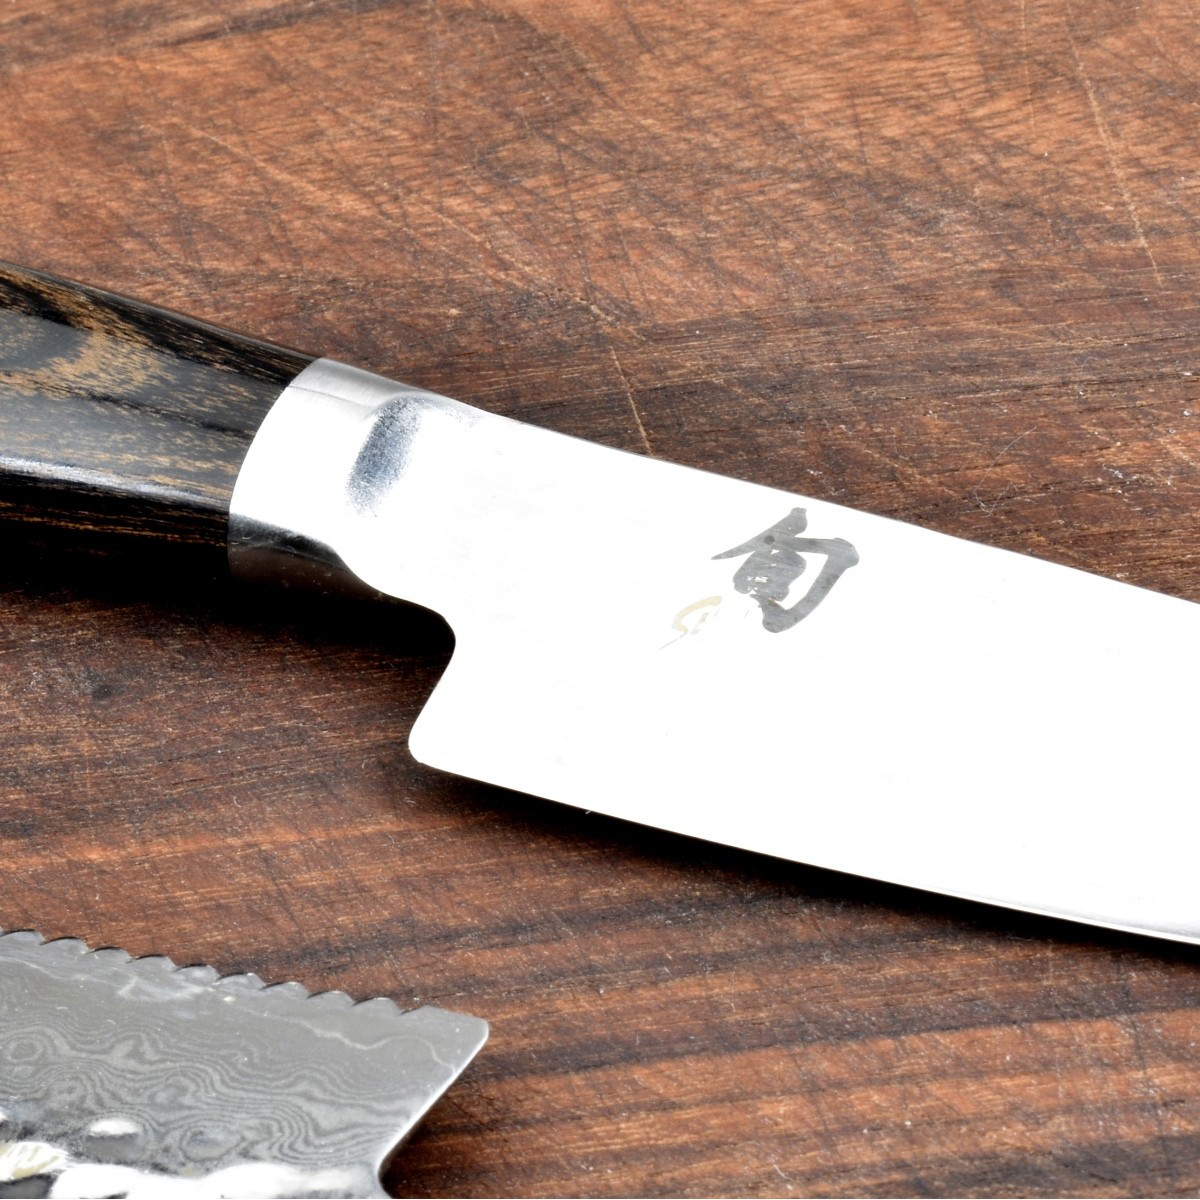 Two Shun Japanese Chef's Knives